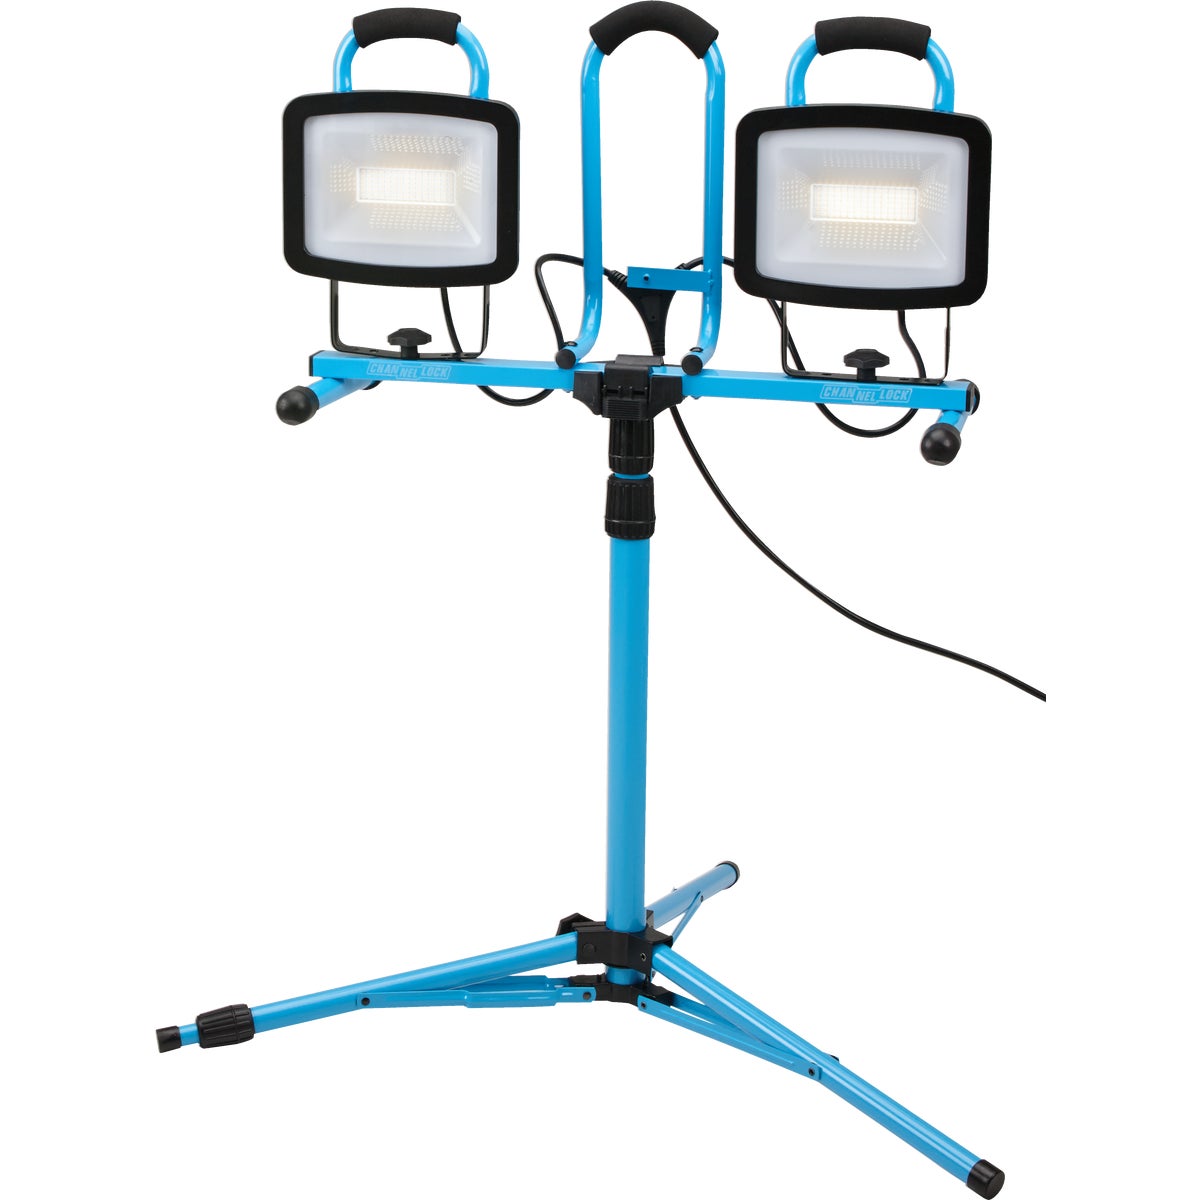 Channellock 13,200 Lm. LED Twin Head Tripod Stand-Up Work Light